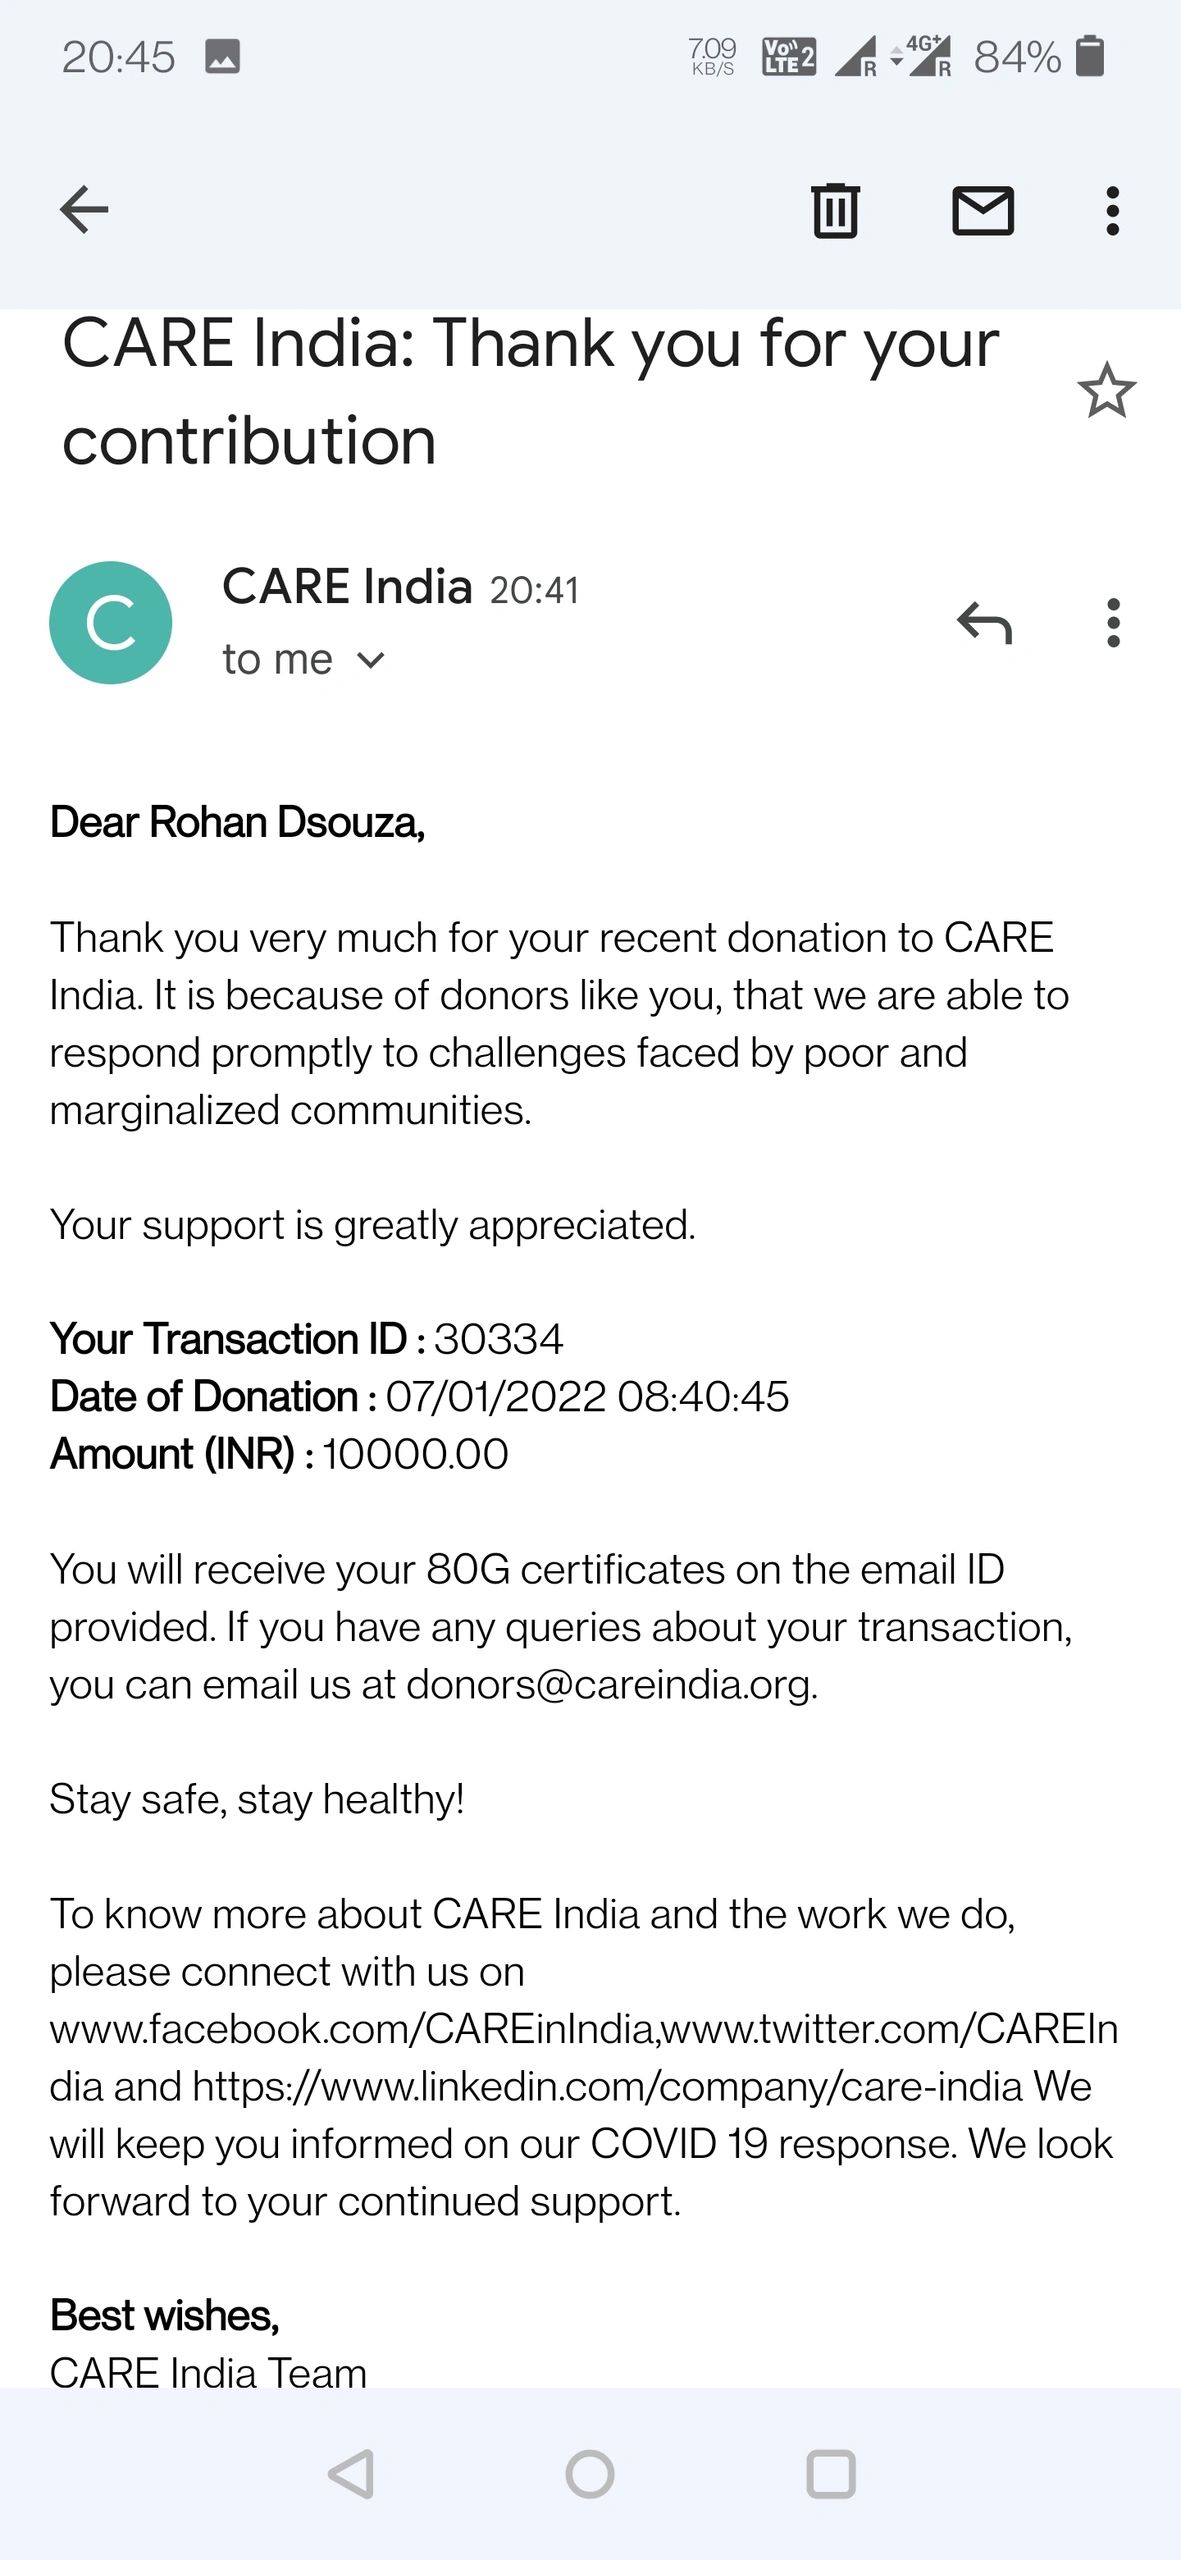 Second Donation made on Jan 07, 2022